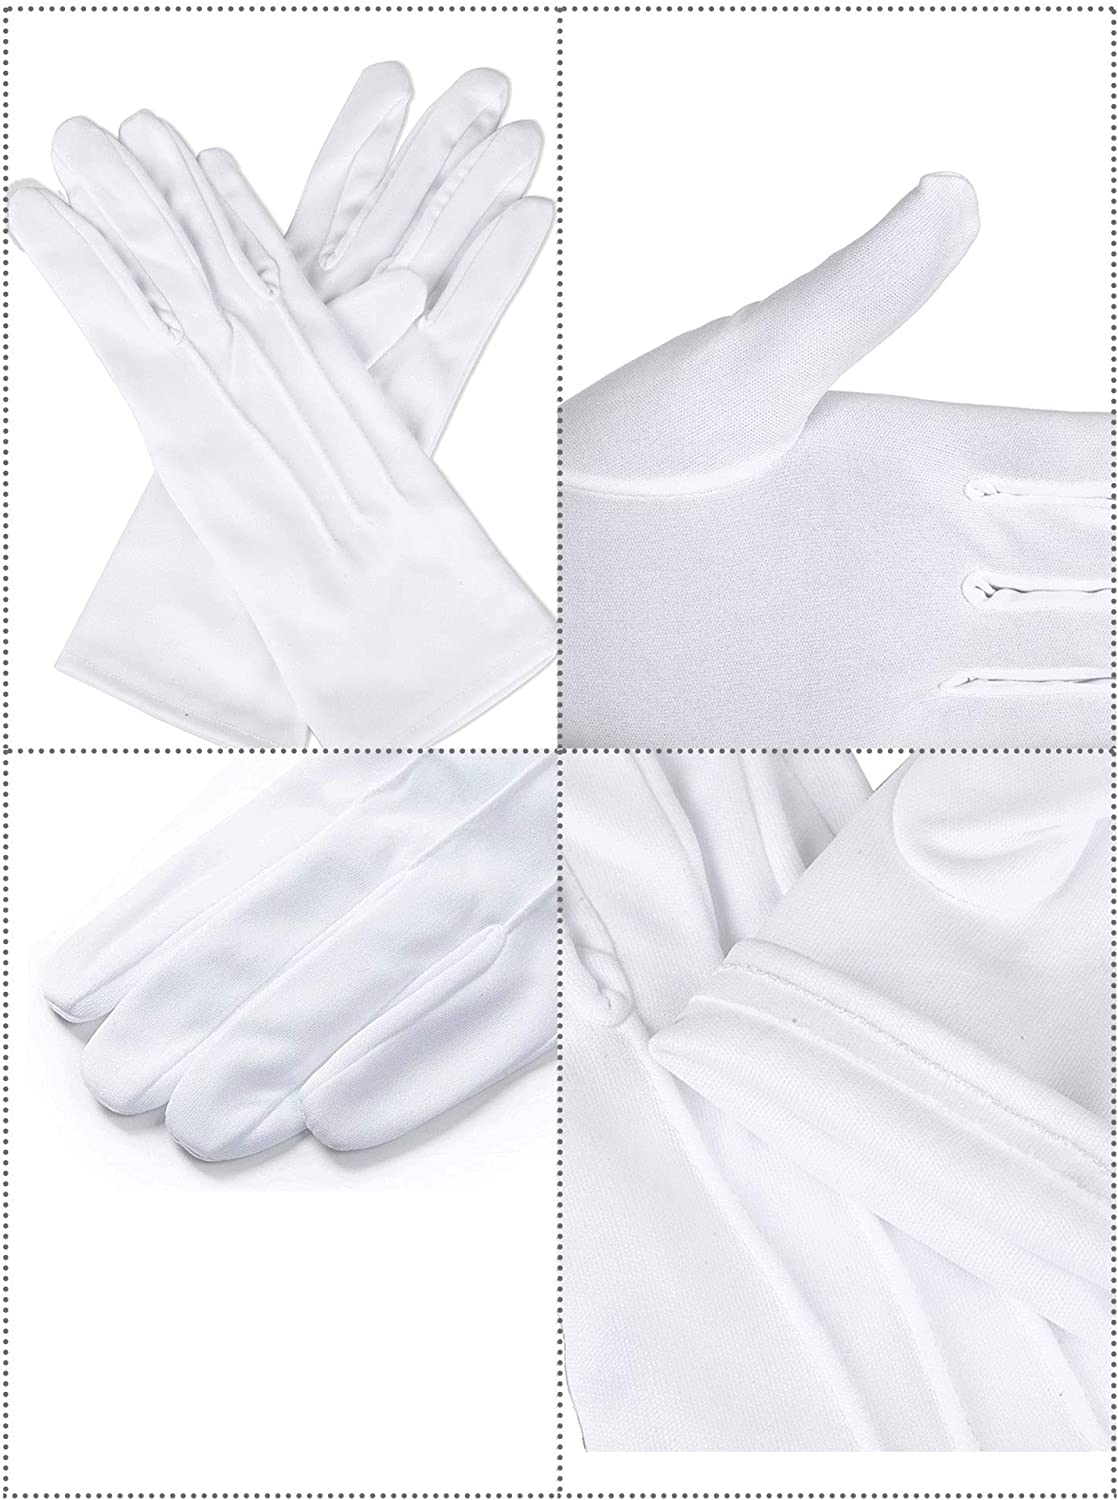 12 Pairs Uniform Gloves Spandex White Dress Gloves for Parade Formal Guard Costume